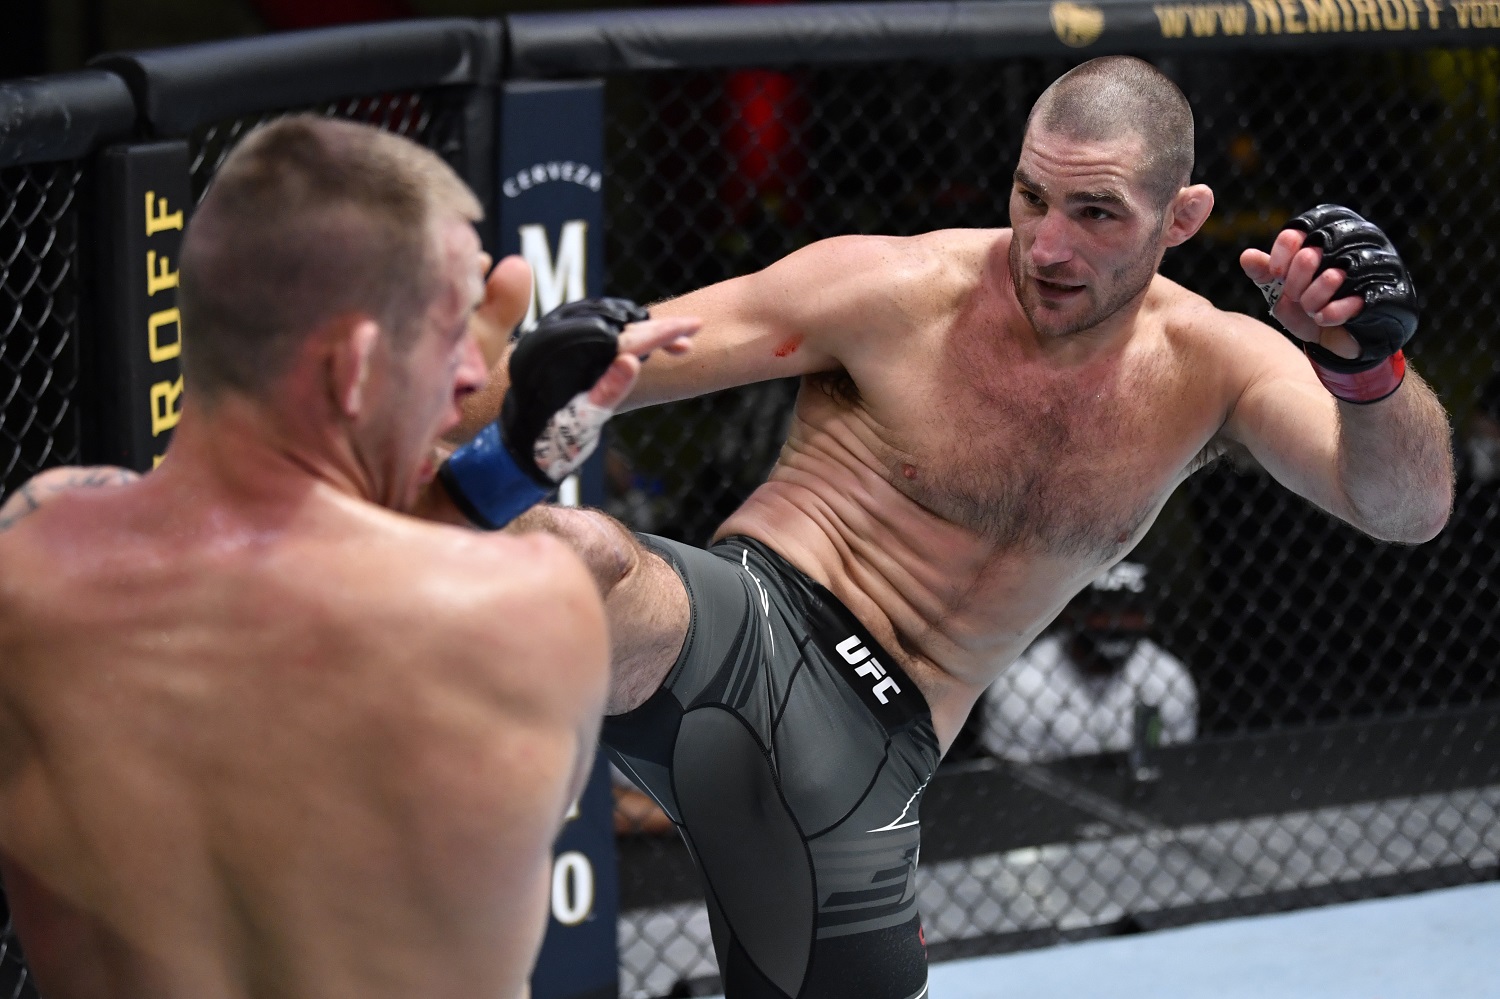 UFC Fighter Sean Strickland’s Candid Admission Is a Stain on the Sport